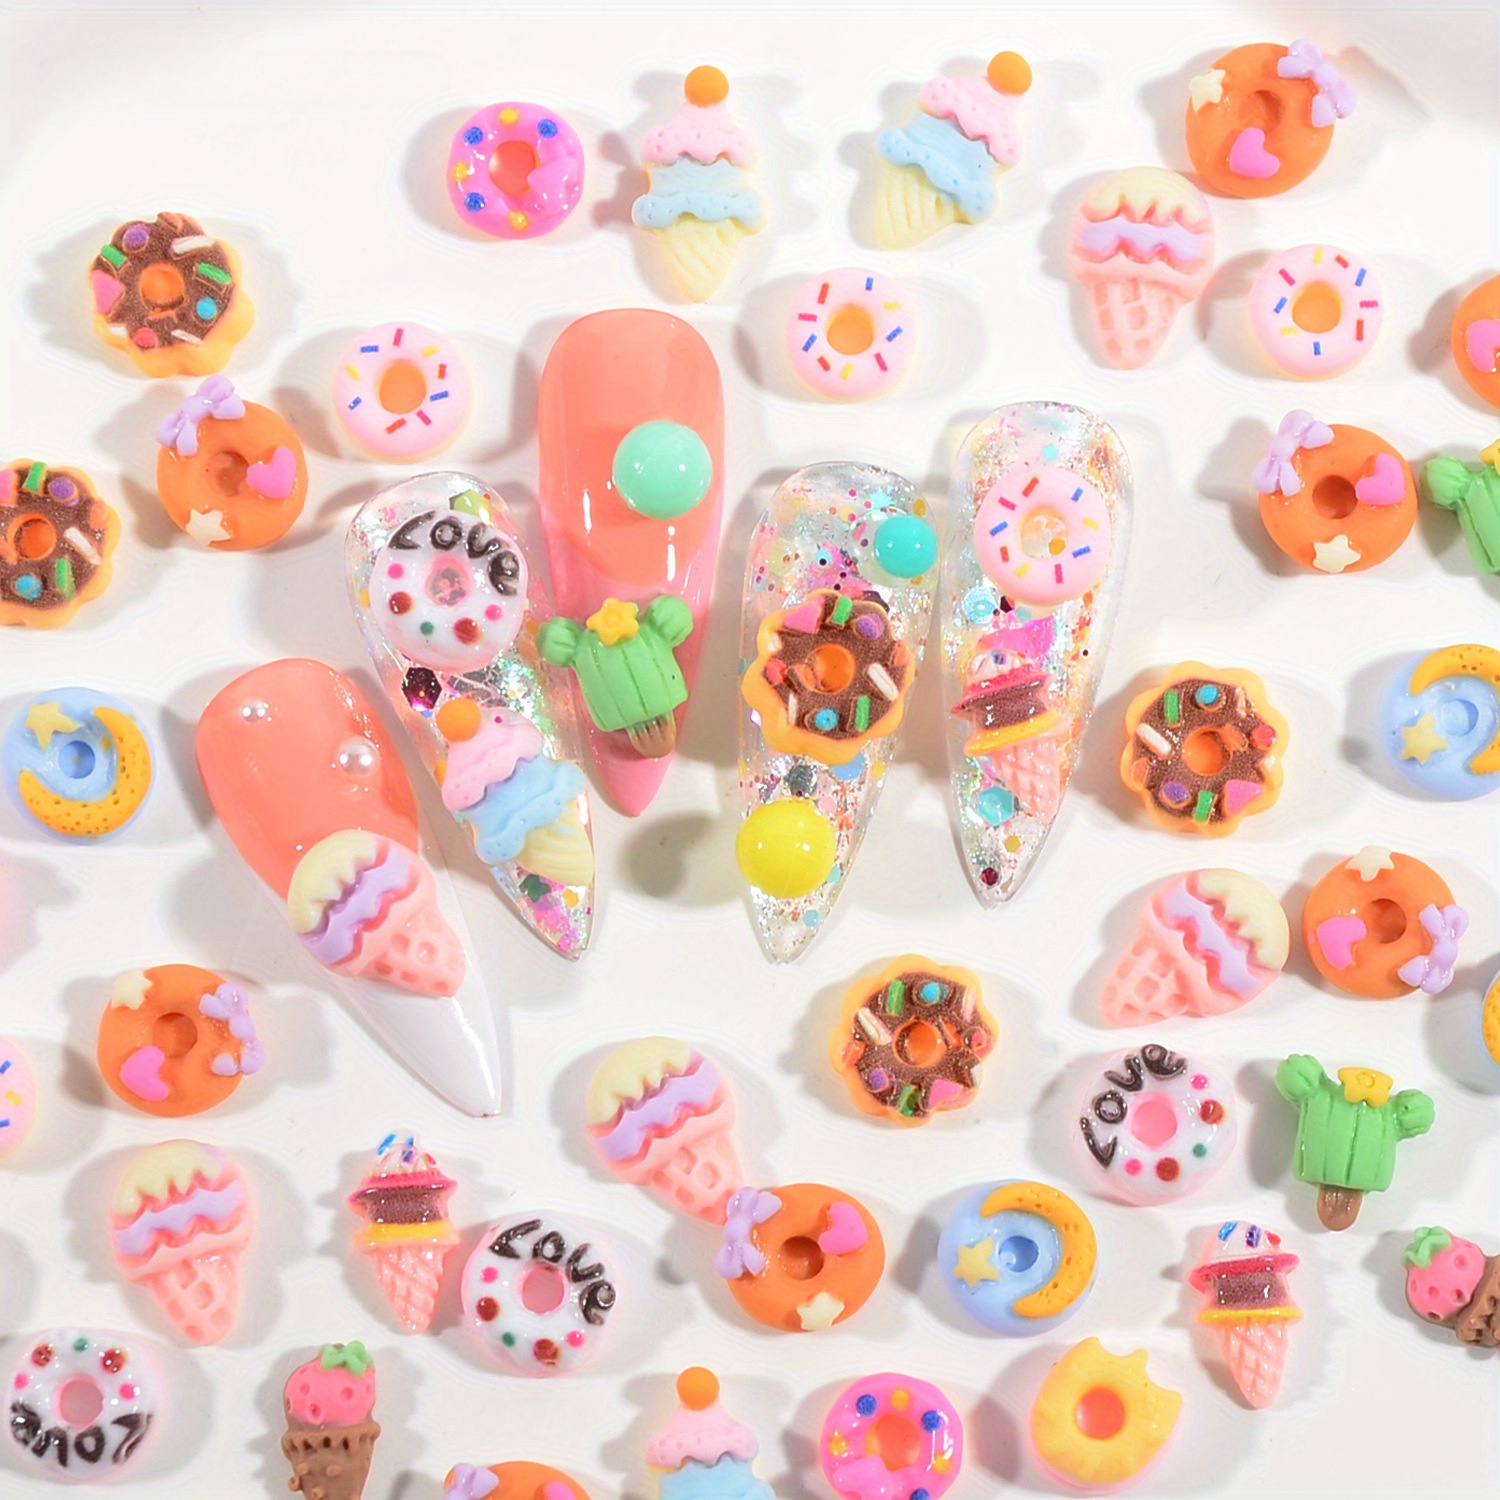 

50pcs Kawaii Mini Ice Cream Donut Nail Art Charms, Colorful 3d Diy Decoration Charms For Nails, Manicure Design Embellishments Nail Art Supplies For Women And Girls